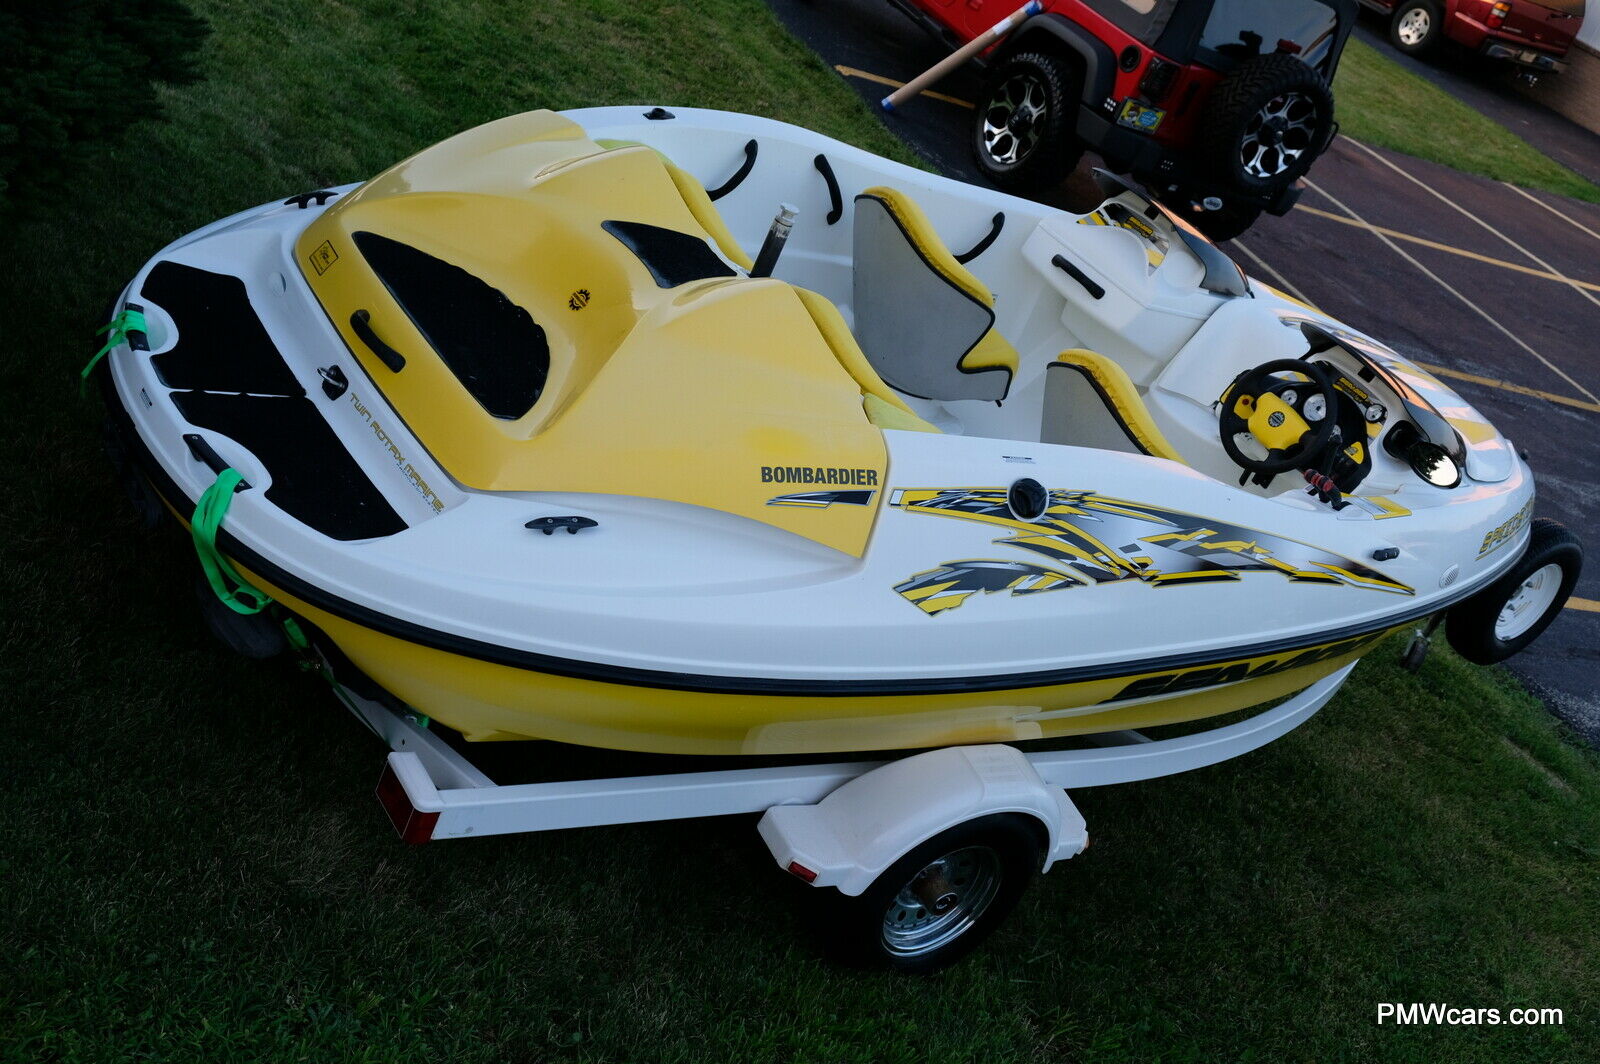 Sea Doo Bombardier SK 2000 for sale for $7,500 - Boats-from-USA.com